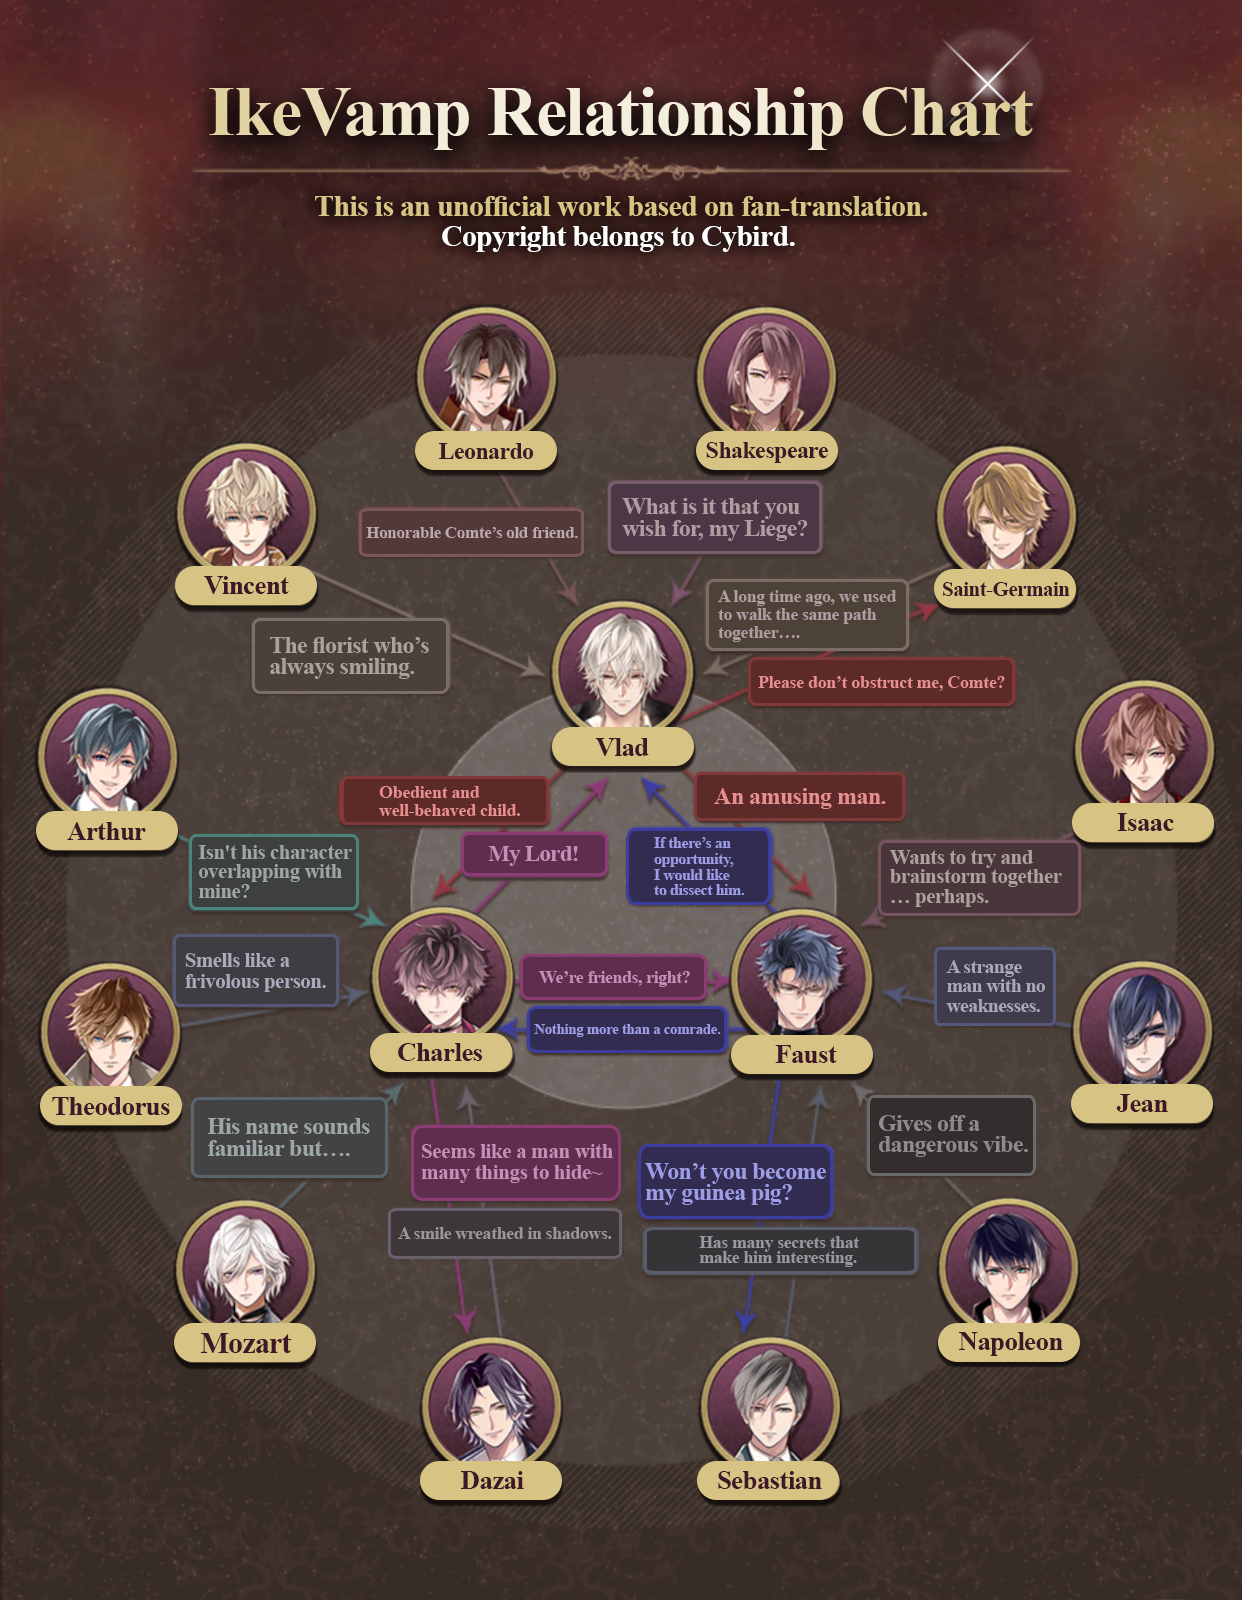 IkeVamp Archive — Another relationship chart, this time featuring...